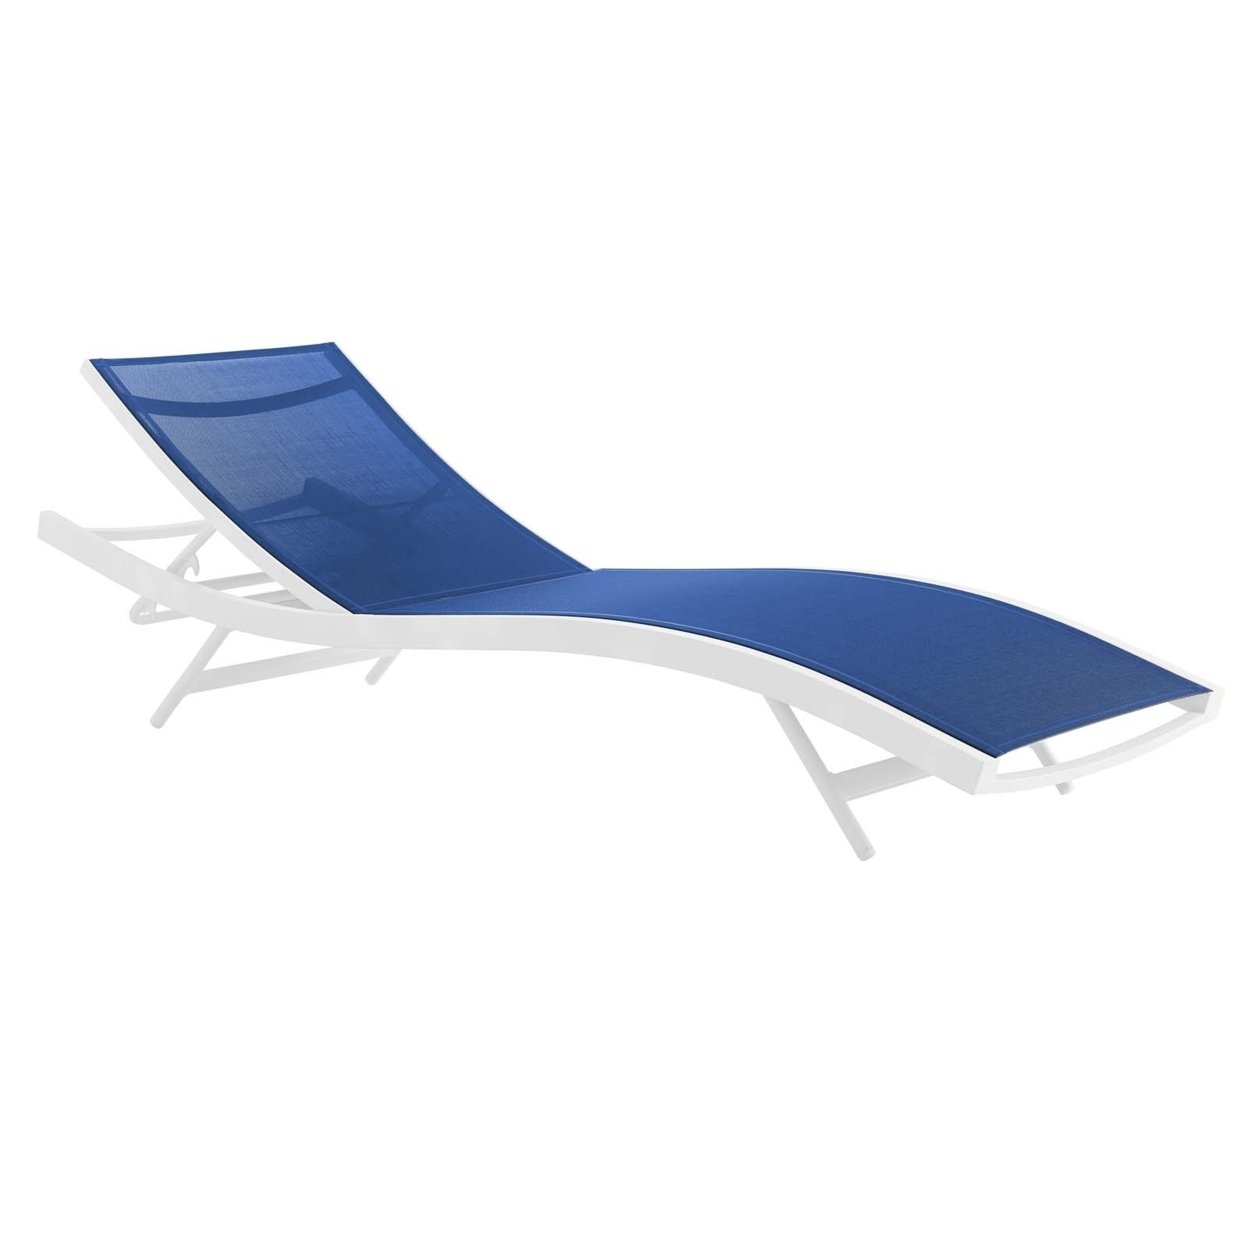 Glimpse Outdoor Patio Mesh Chaise Lounge Set Of 2, White Navy